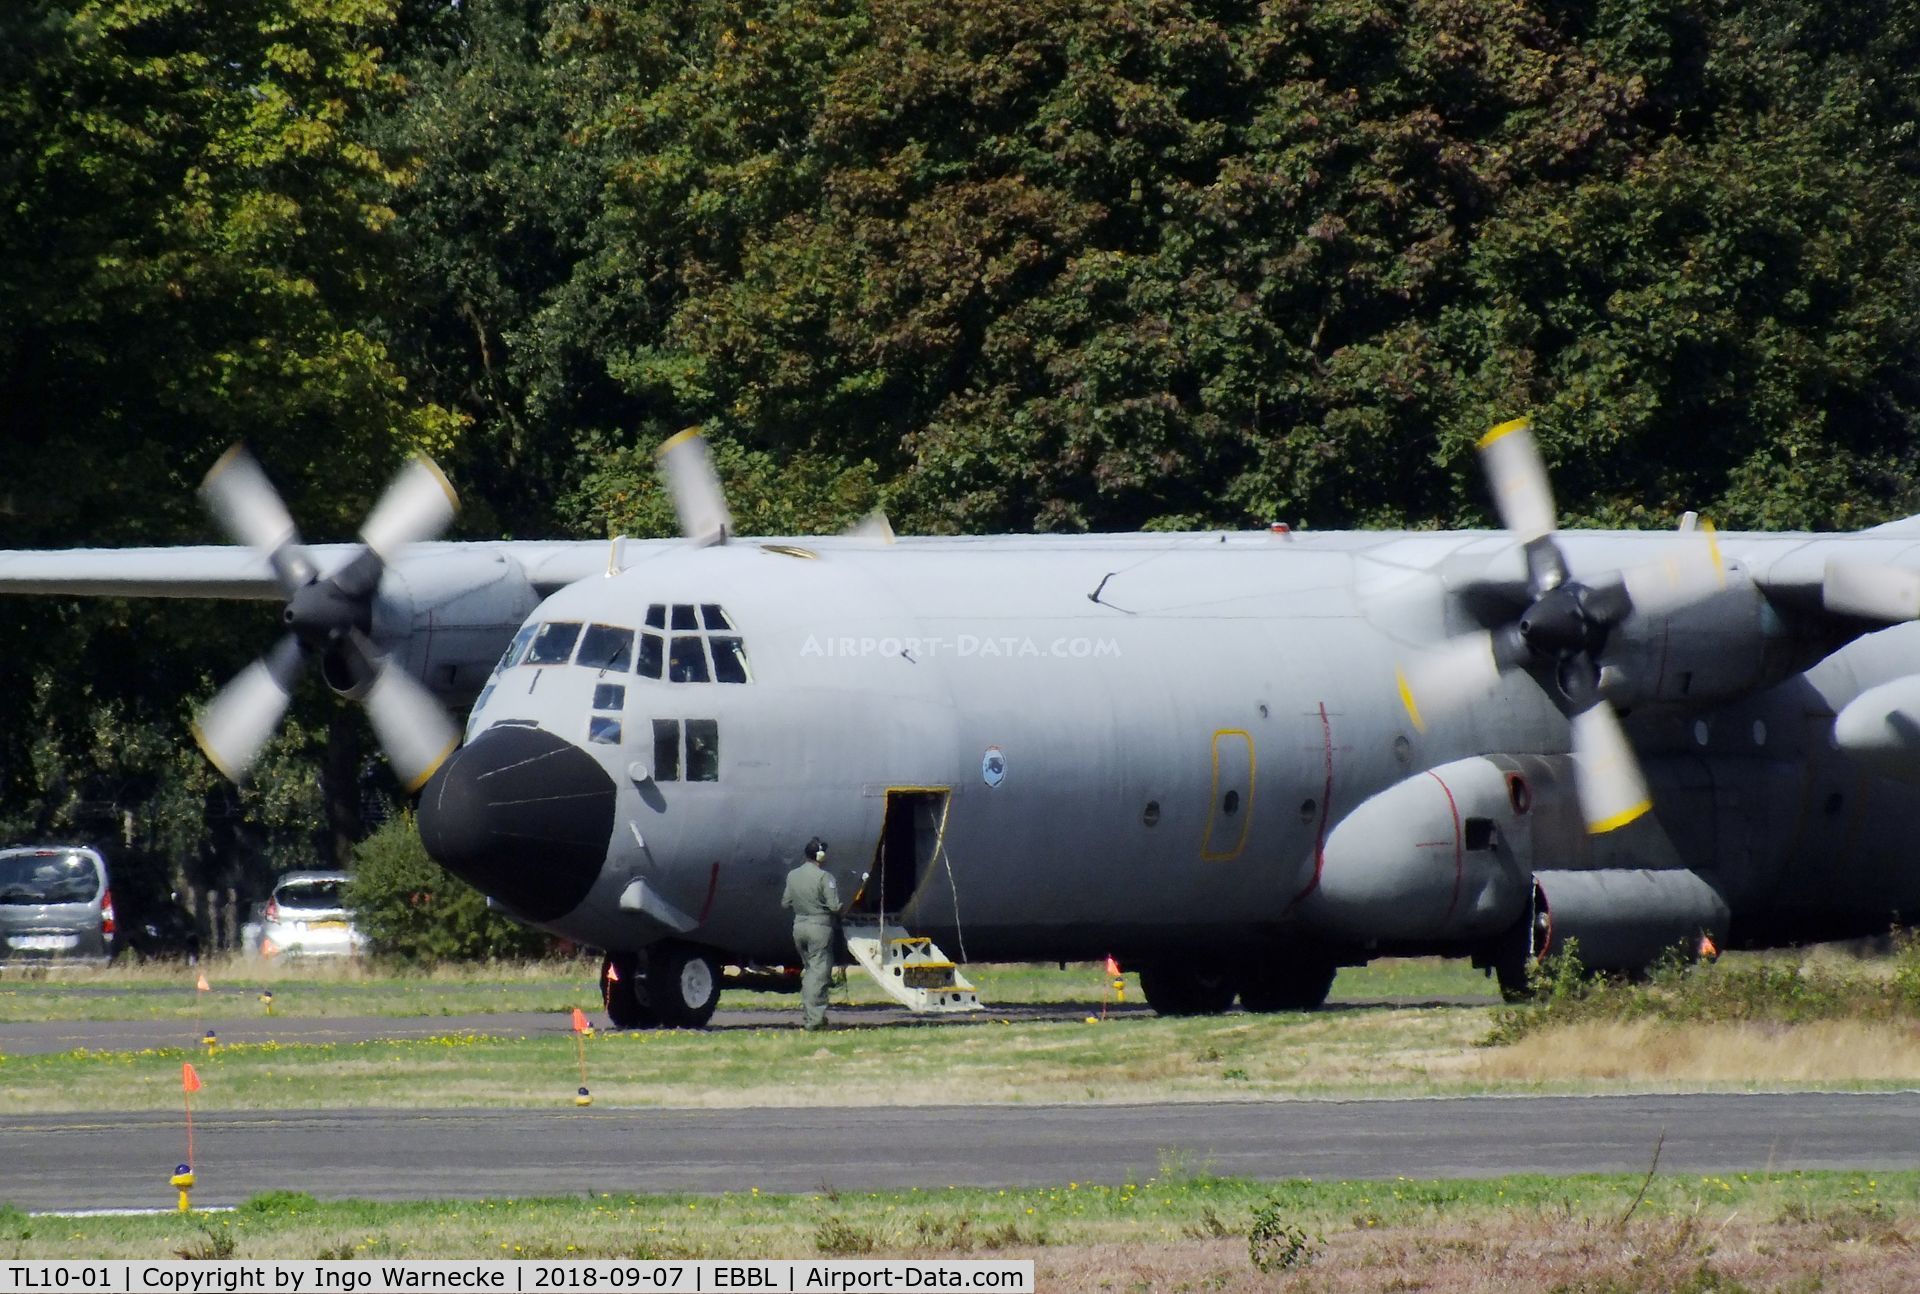 TL10-01, 1988 Lockheed C-130H-30 Hercules C/N 382-5003, Lockheed C-130H-30 Hercules of the Ejercito del Aire (Spanish AF) at the 2018 BAFD spotters day, Kleine Brogel airbase